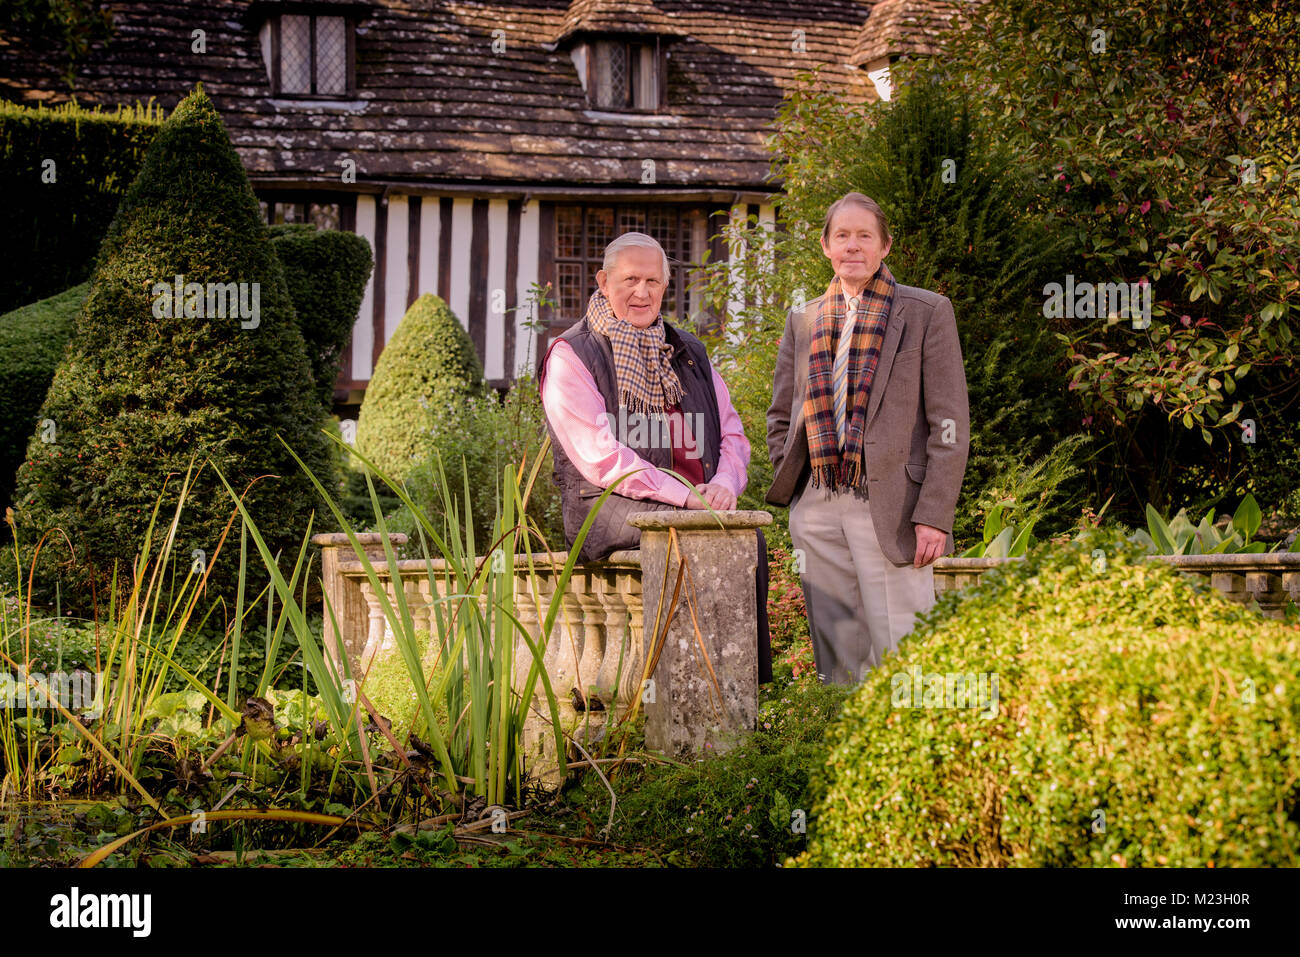 St Mary's House Bramber West Sussex Peter Thorogood (links) und Roger Linton (rechts) Stockfoto